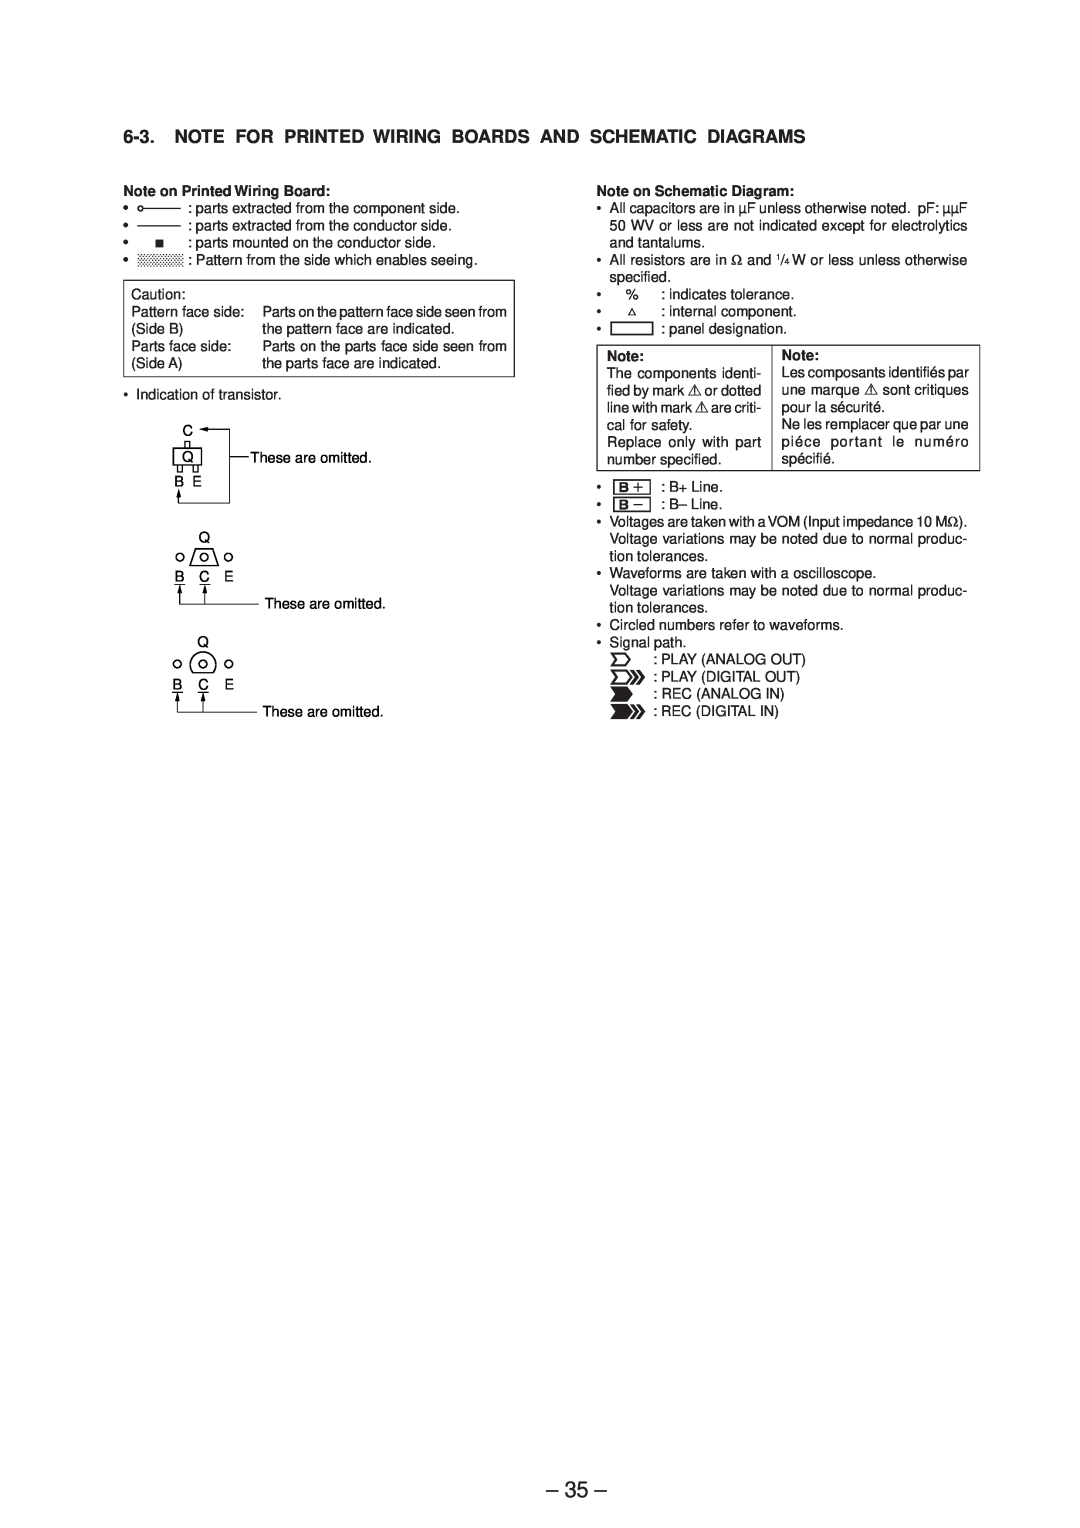 Sony MDS-JE630 service manual Note on Printed Wiring Board, Note on Schematic Diagram 